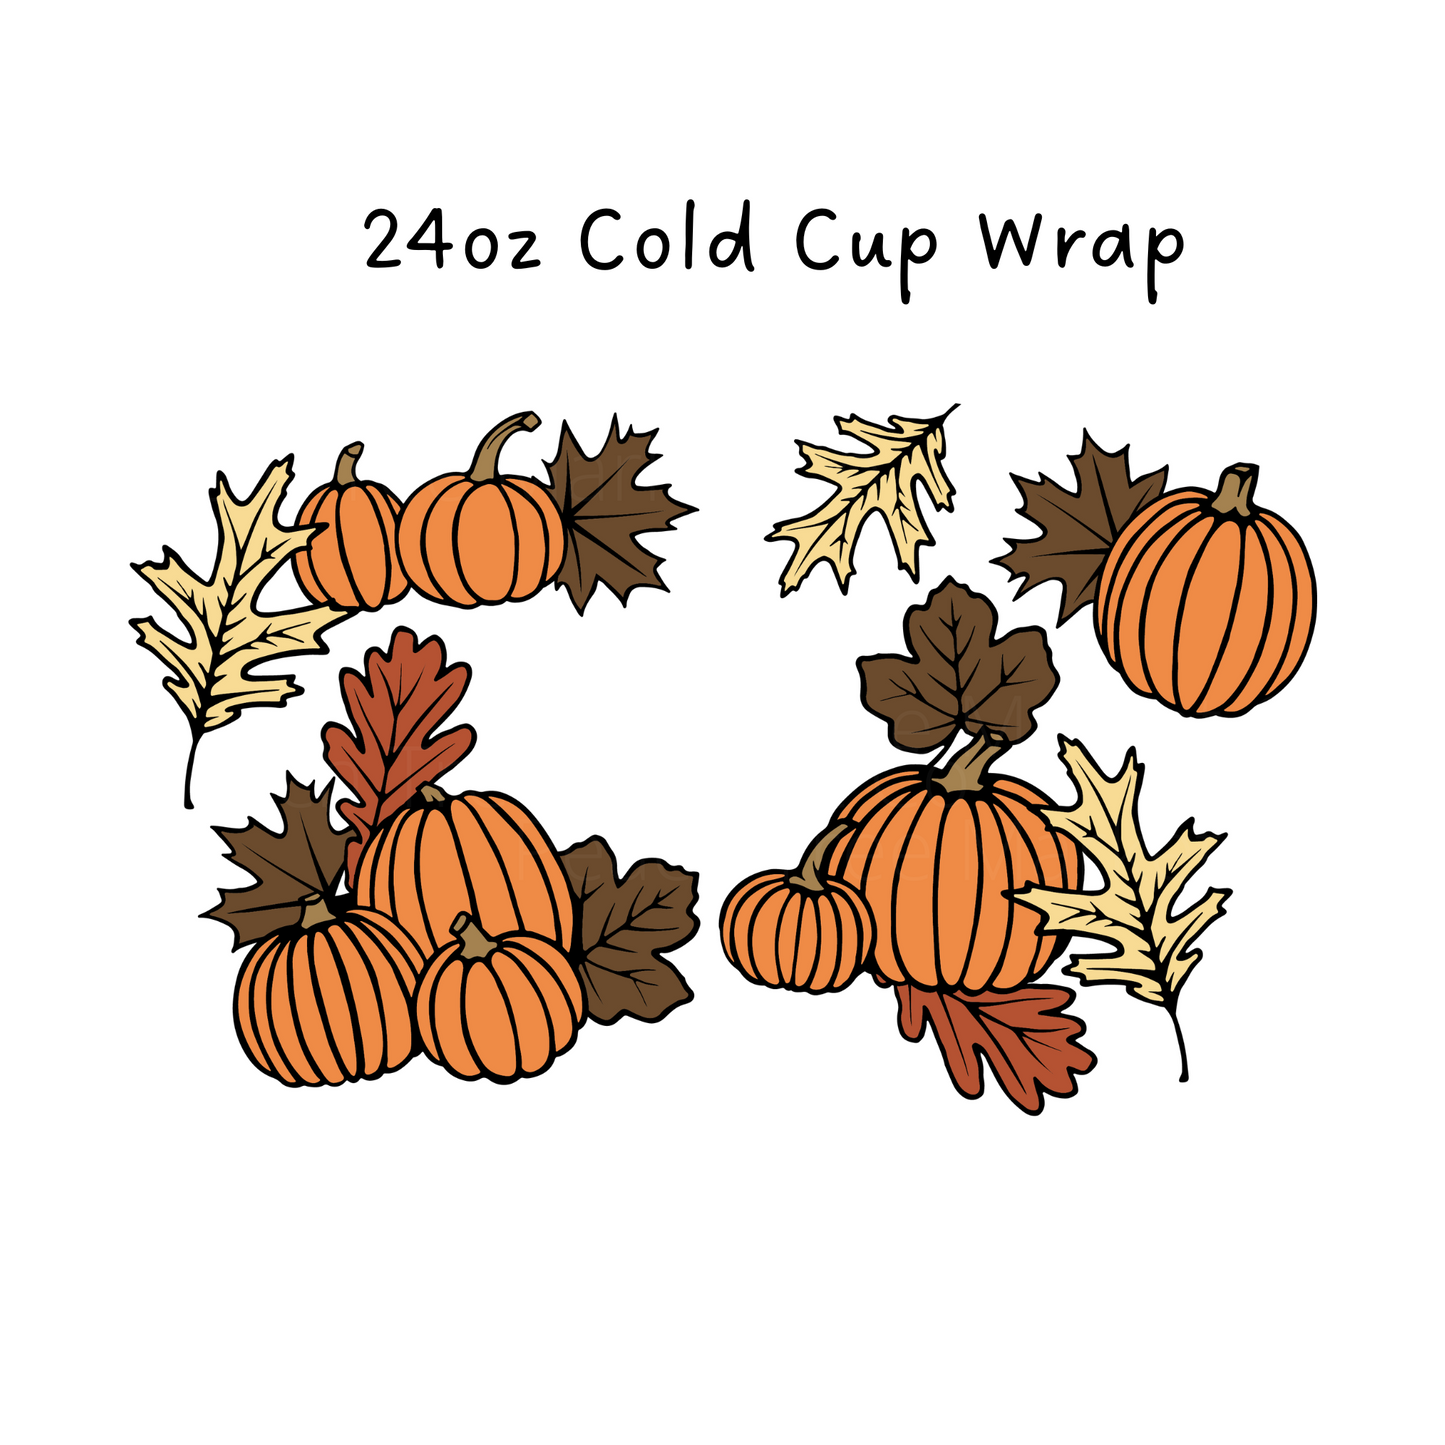 Pumpkins and Leaves 24 OZ Cold Cup Wrap